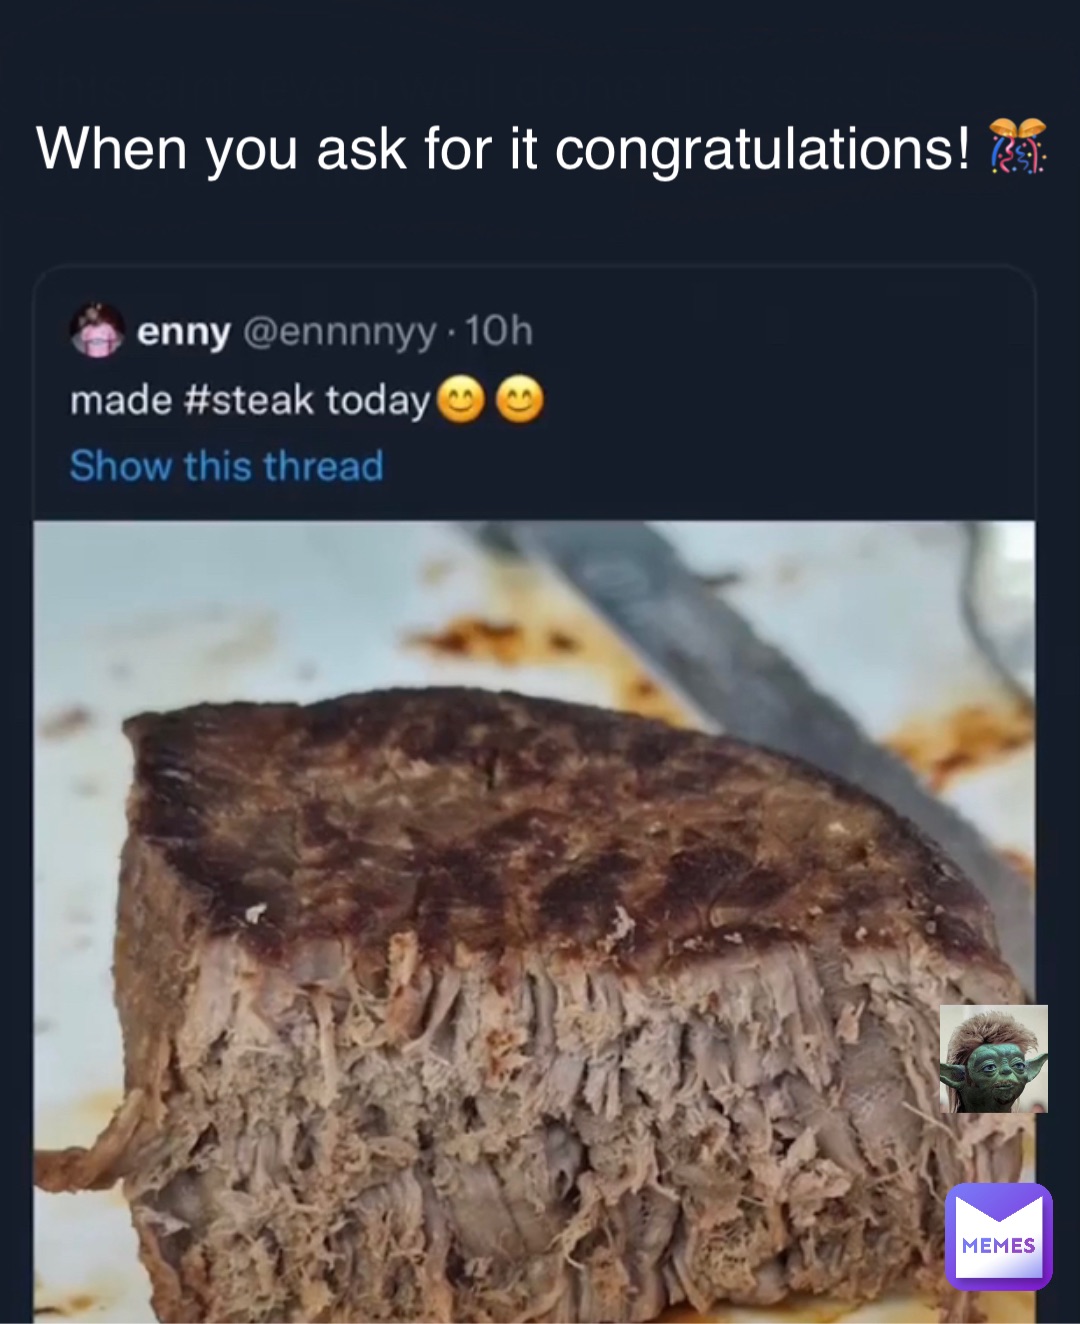 When you ask for it congratulations! 🎊